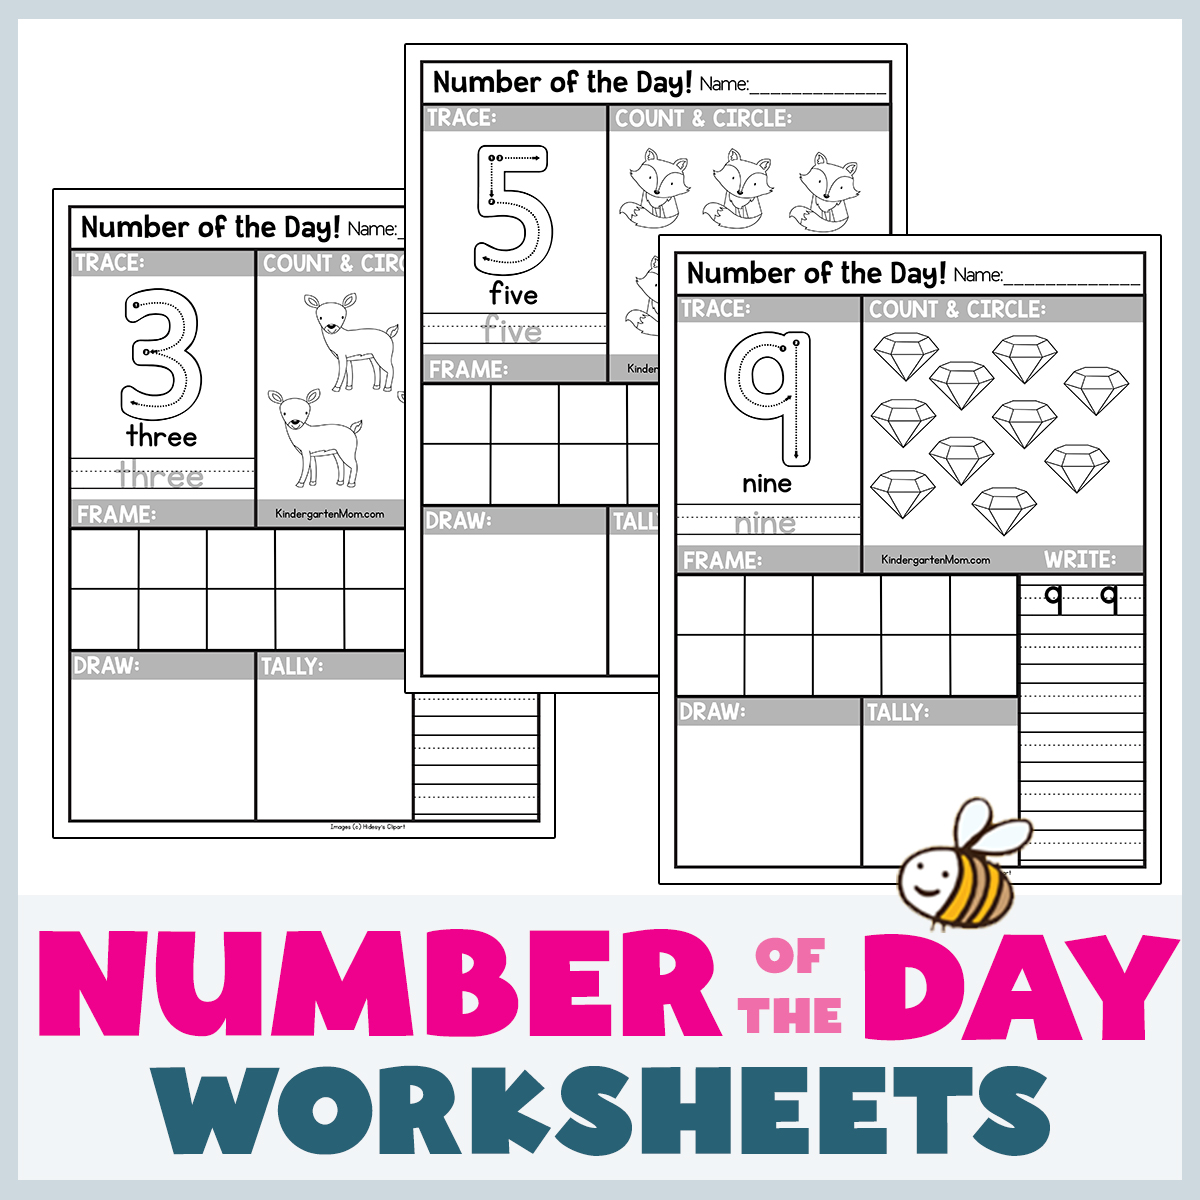 Number of the Day Worksheets